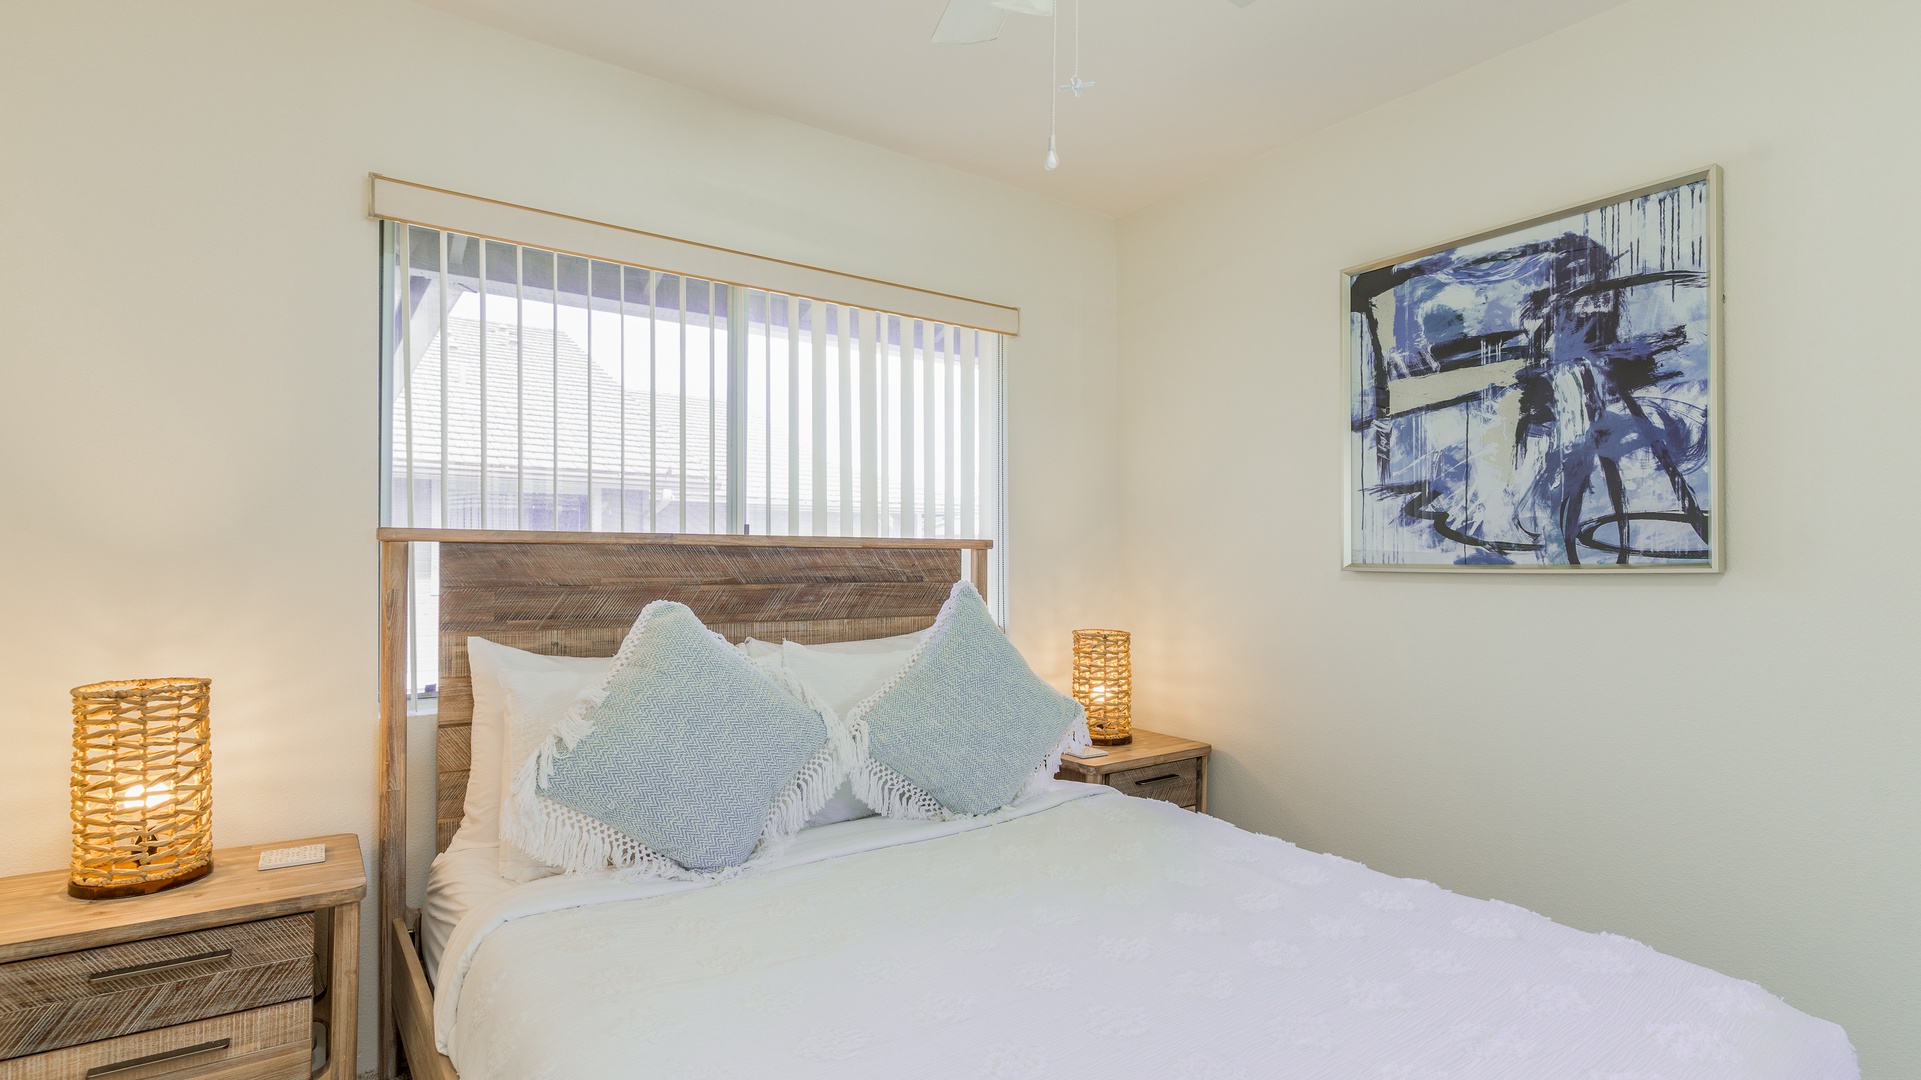 Kapolei Vacation Rentals, Fairways at Ko Olina 27H - The second upstairs guest bedroom with a queen bed for a comfortable slumber.